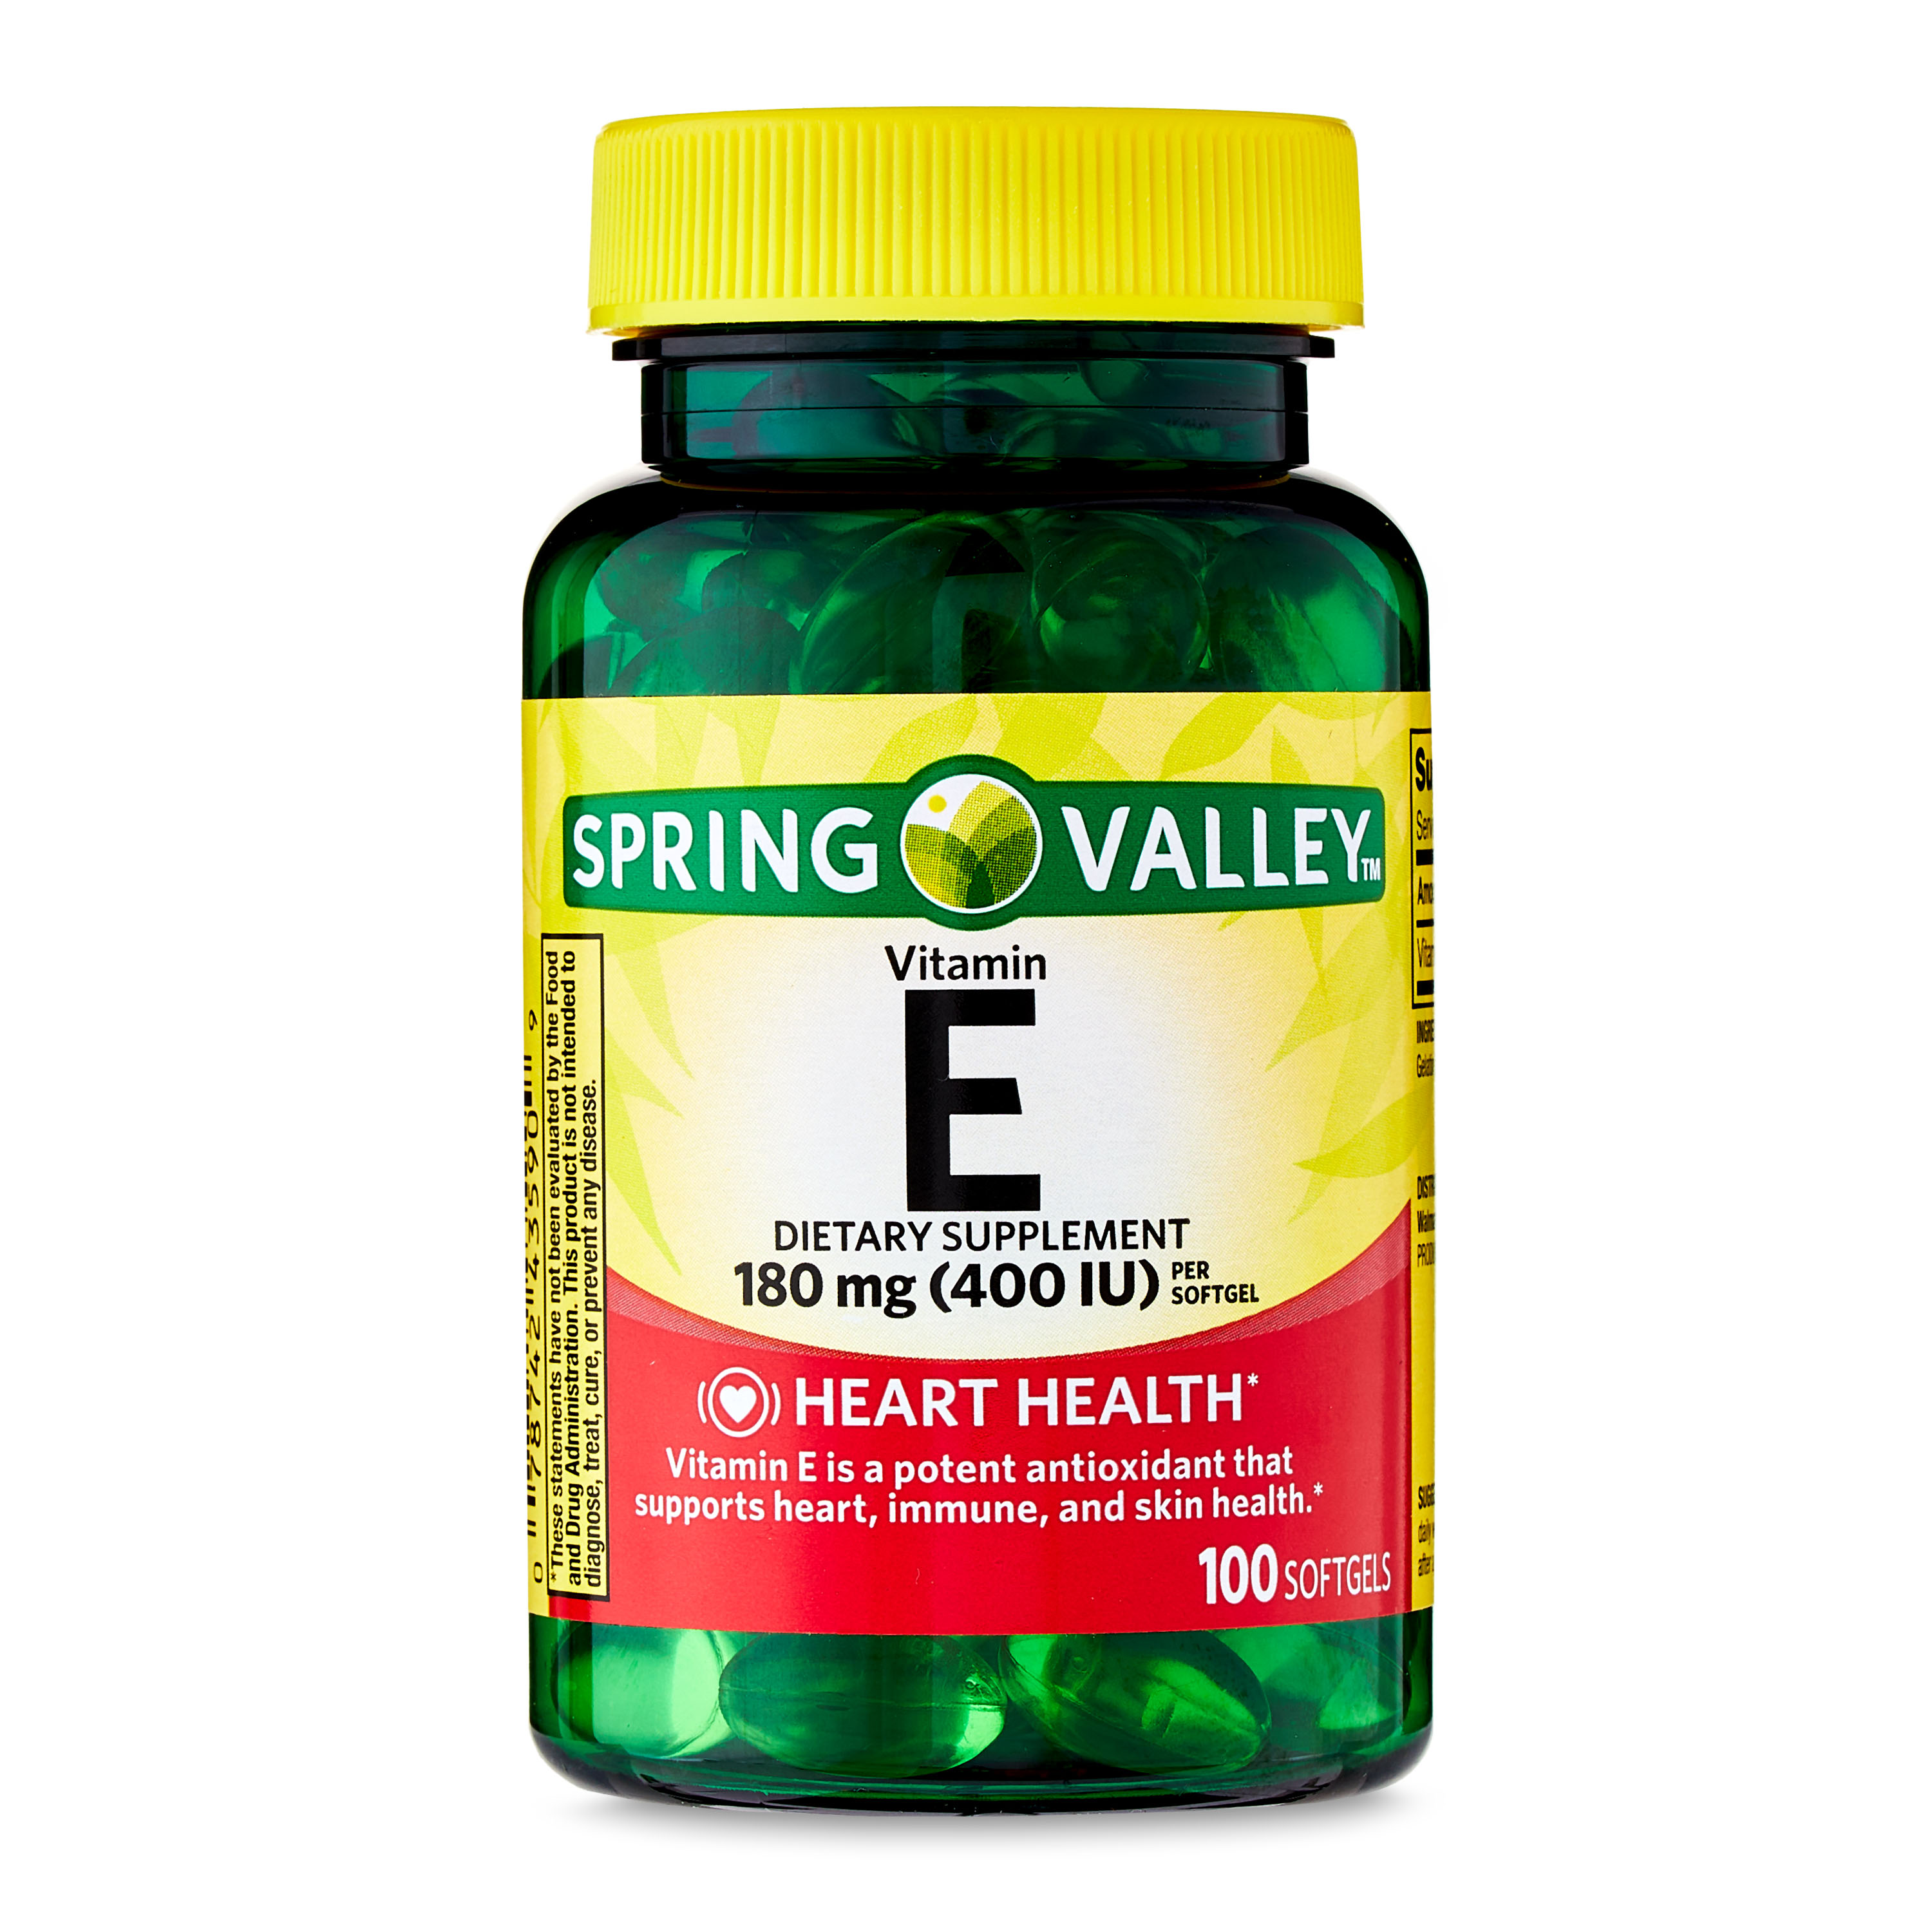 Spring Valley Vitamin E Heart Health Dietary Supplement Softgels, 180 mg (400 IU), 100 Count - image 1 of 9